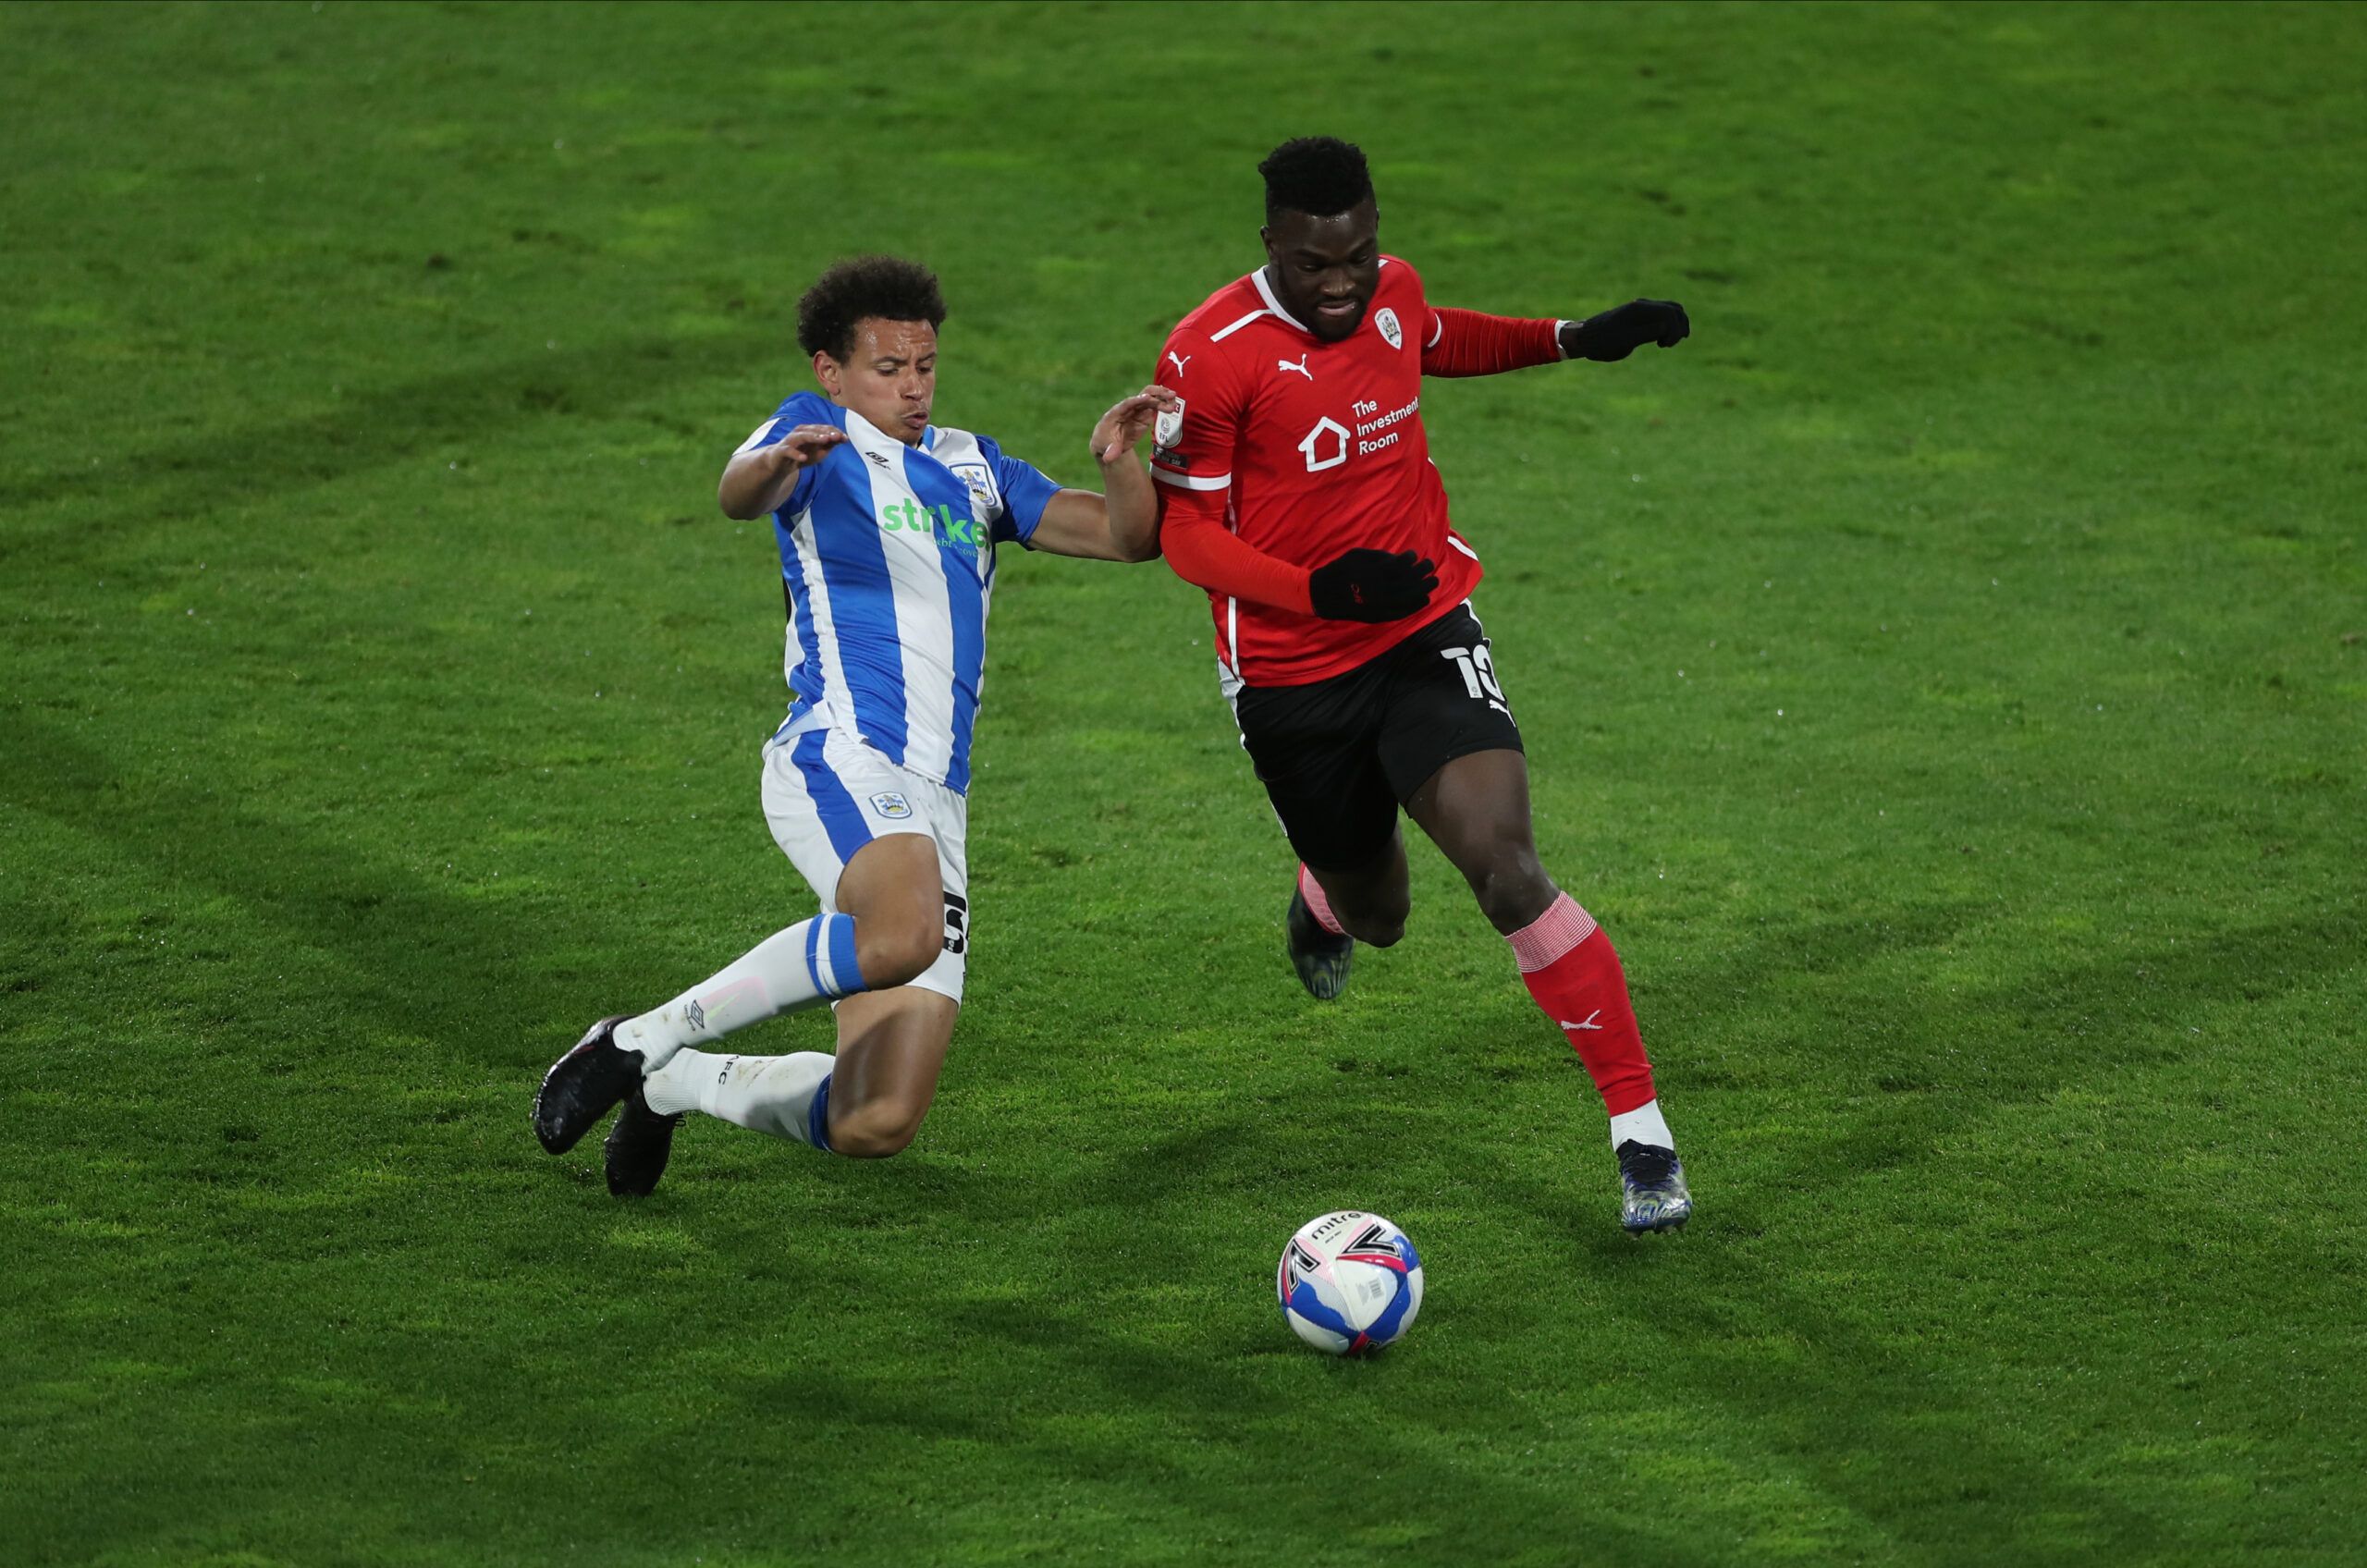 Soccer Football - Championship - Huddersfield Town v Barnsley - John Smith's Stadium, Huddersfield, Britain - April 21, 2021 Barnsley's Daryl Dike in action with Huddersfield Town's Rarmani Edmonds-Green Action Images/Lee Smith EDITORIAL USE ONLY. No use with unauthorized audio, video, data, fixture lists, club/league logos or 'live' services. Online in-match use limited to 75 images, no video emulation. No use in betting, games or single club /league/player publications.  Please contact your ac